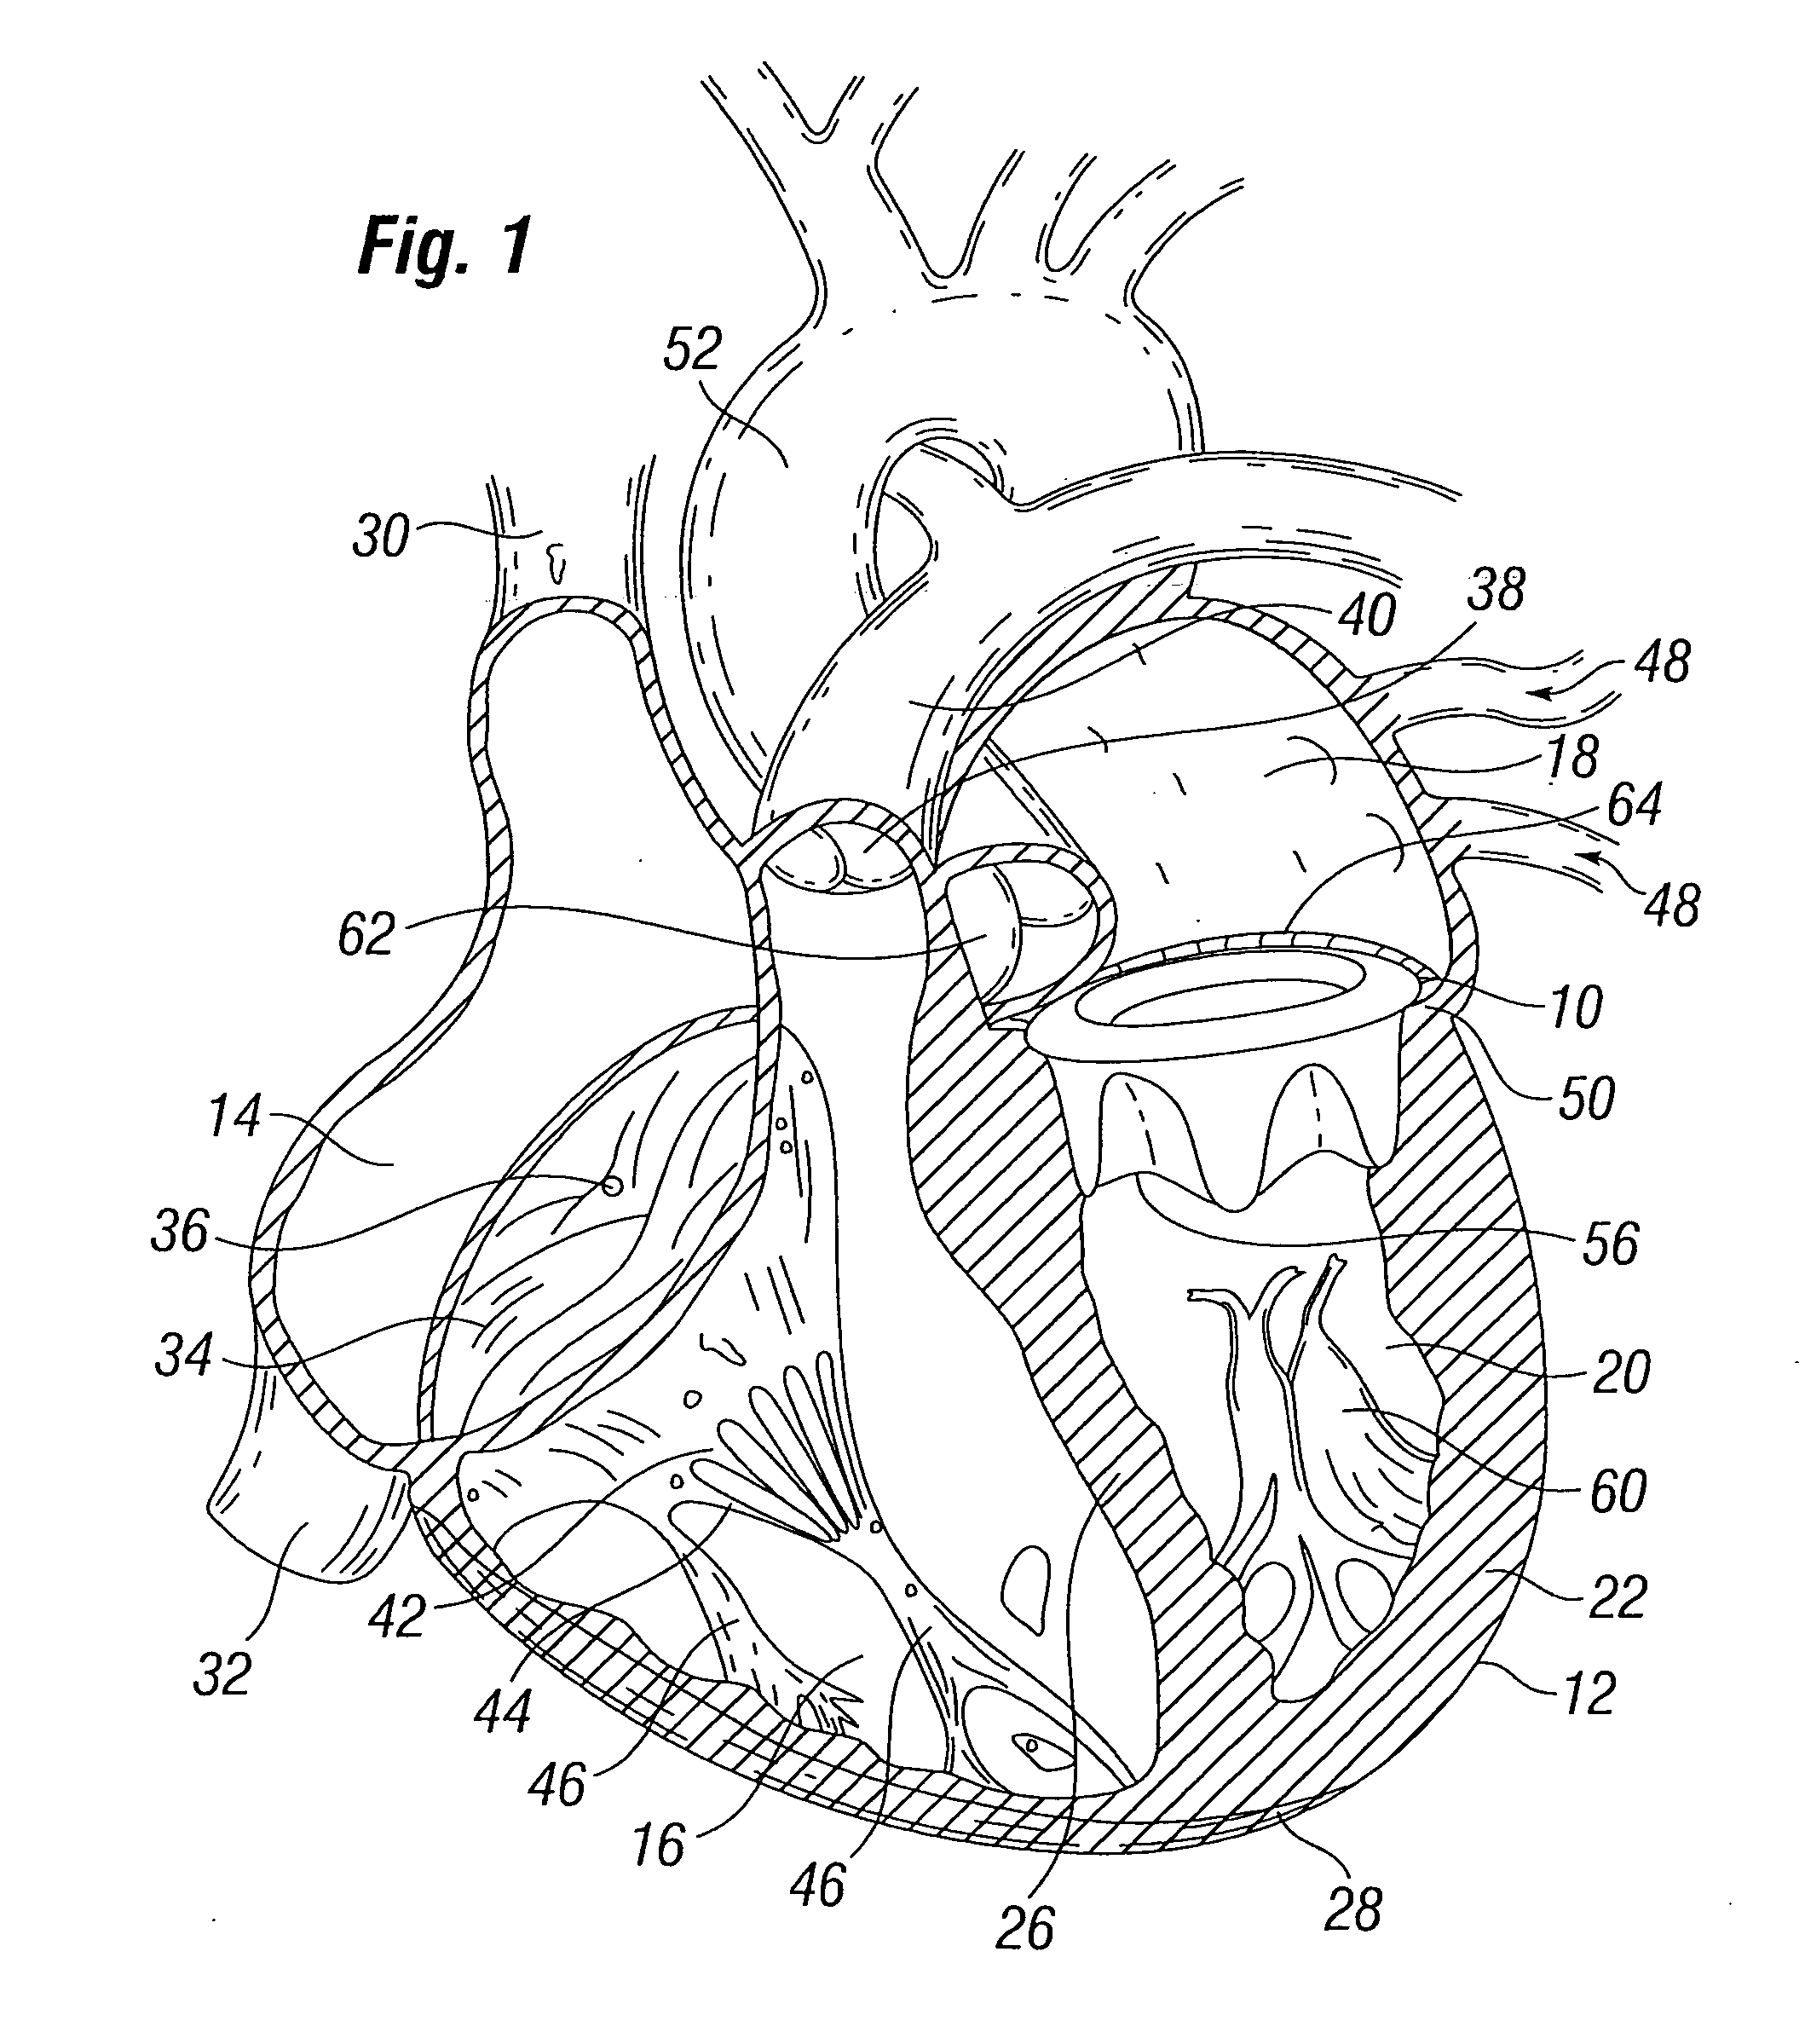 Prosthetic Heart Valve Configured to Receive a Percutaneous Prosthetic Heart Valve Implantation